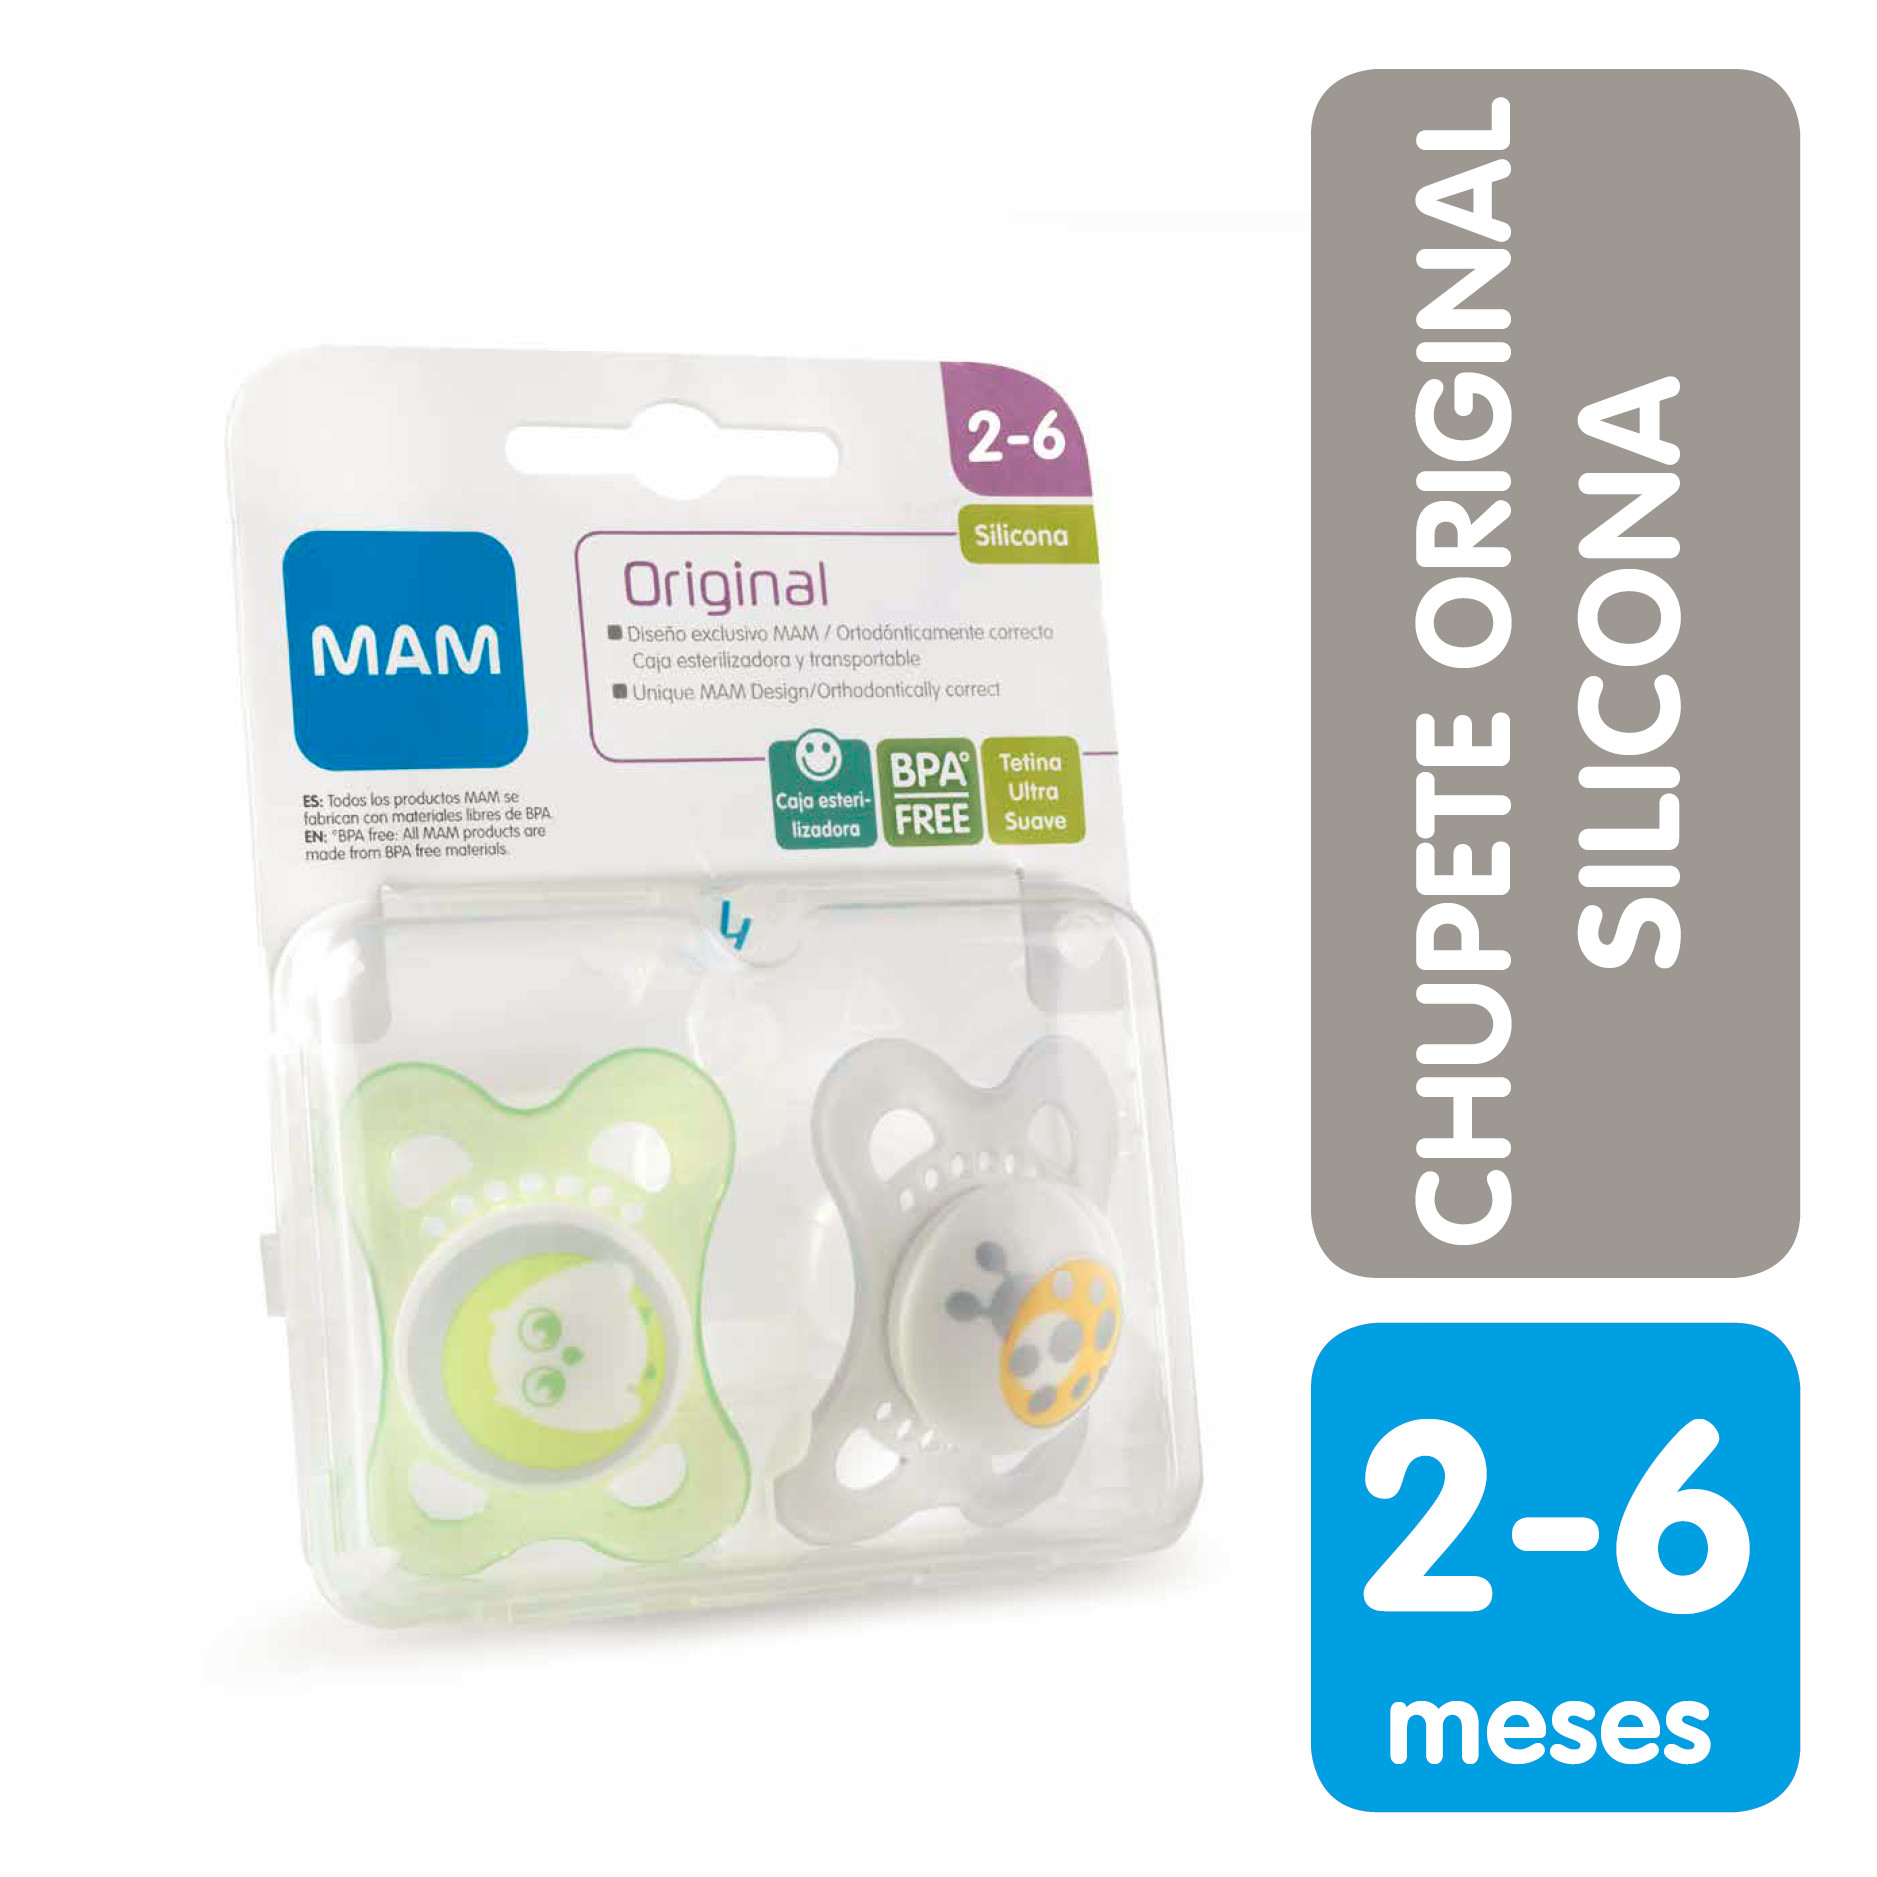 Chupete Mam Start Silicona, Productos